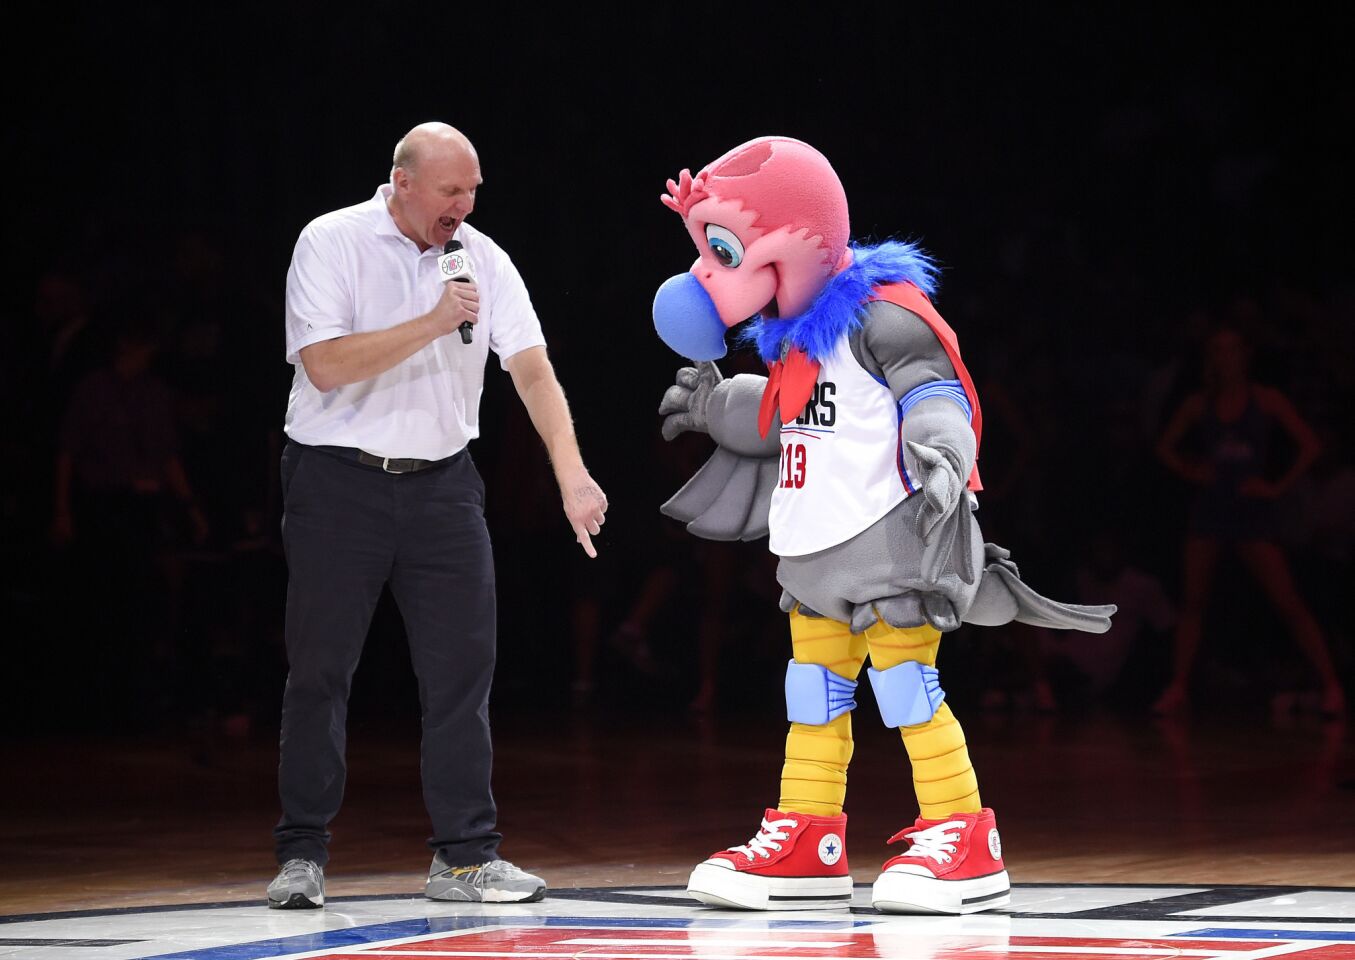 Clippers introduce new mascot Chuck the Condor